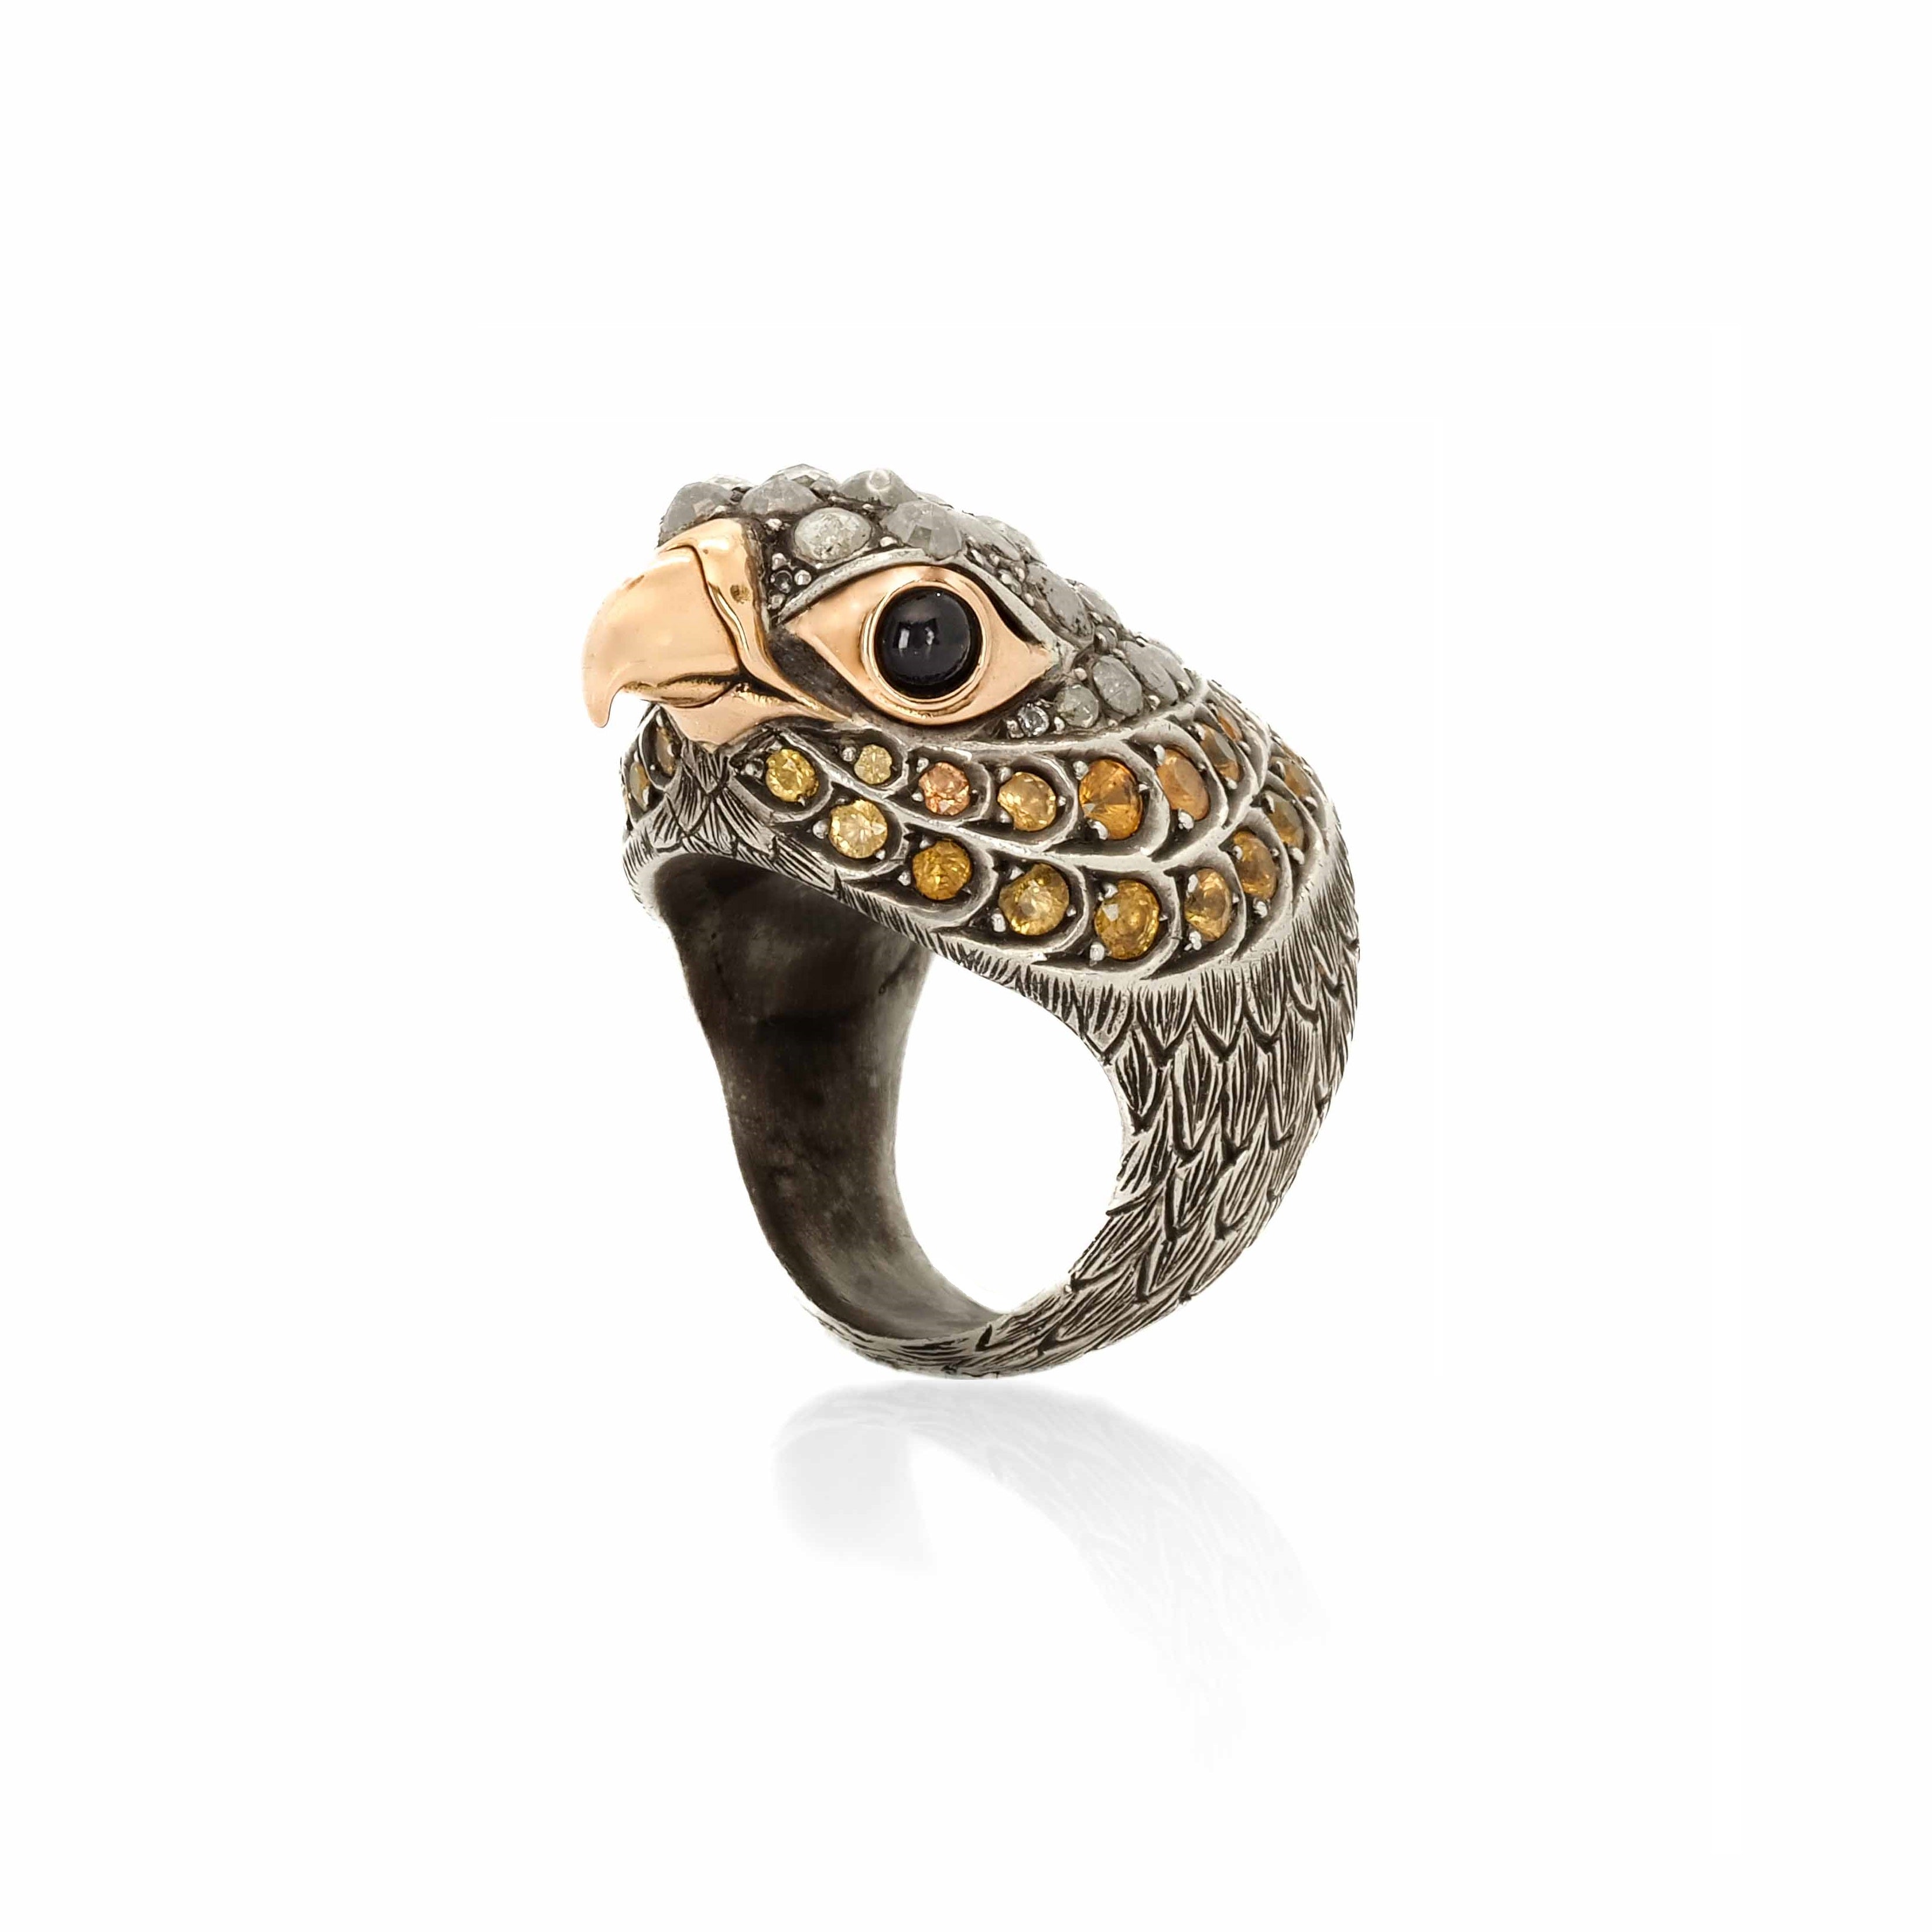 Taru Jewelry Falcon Ring is crafted from 18K rose gold, sterling silver, and featuring a stunning array of yellow sapphires and rosecut diamonds. The falcon is known for its sharp and piercing gaze, and this is perfectly captured in the design of this ring. 